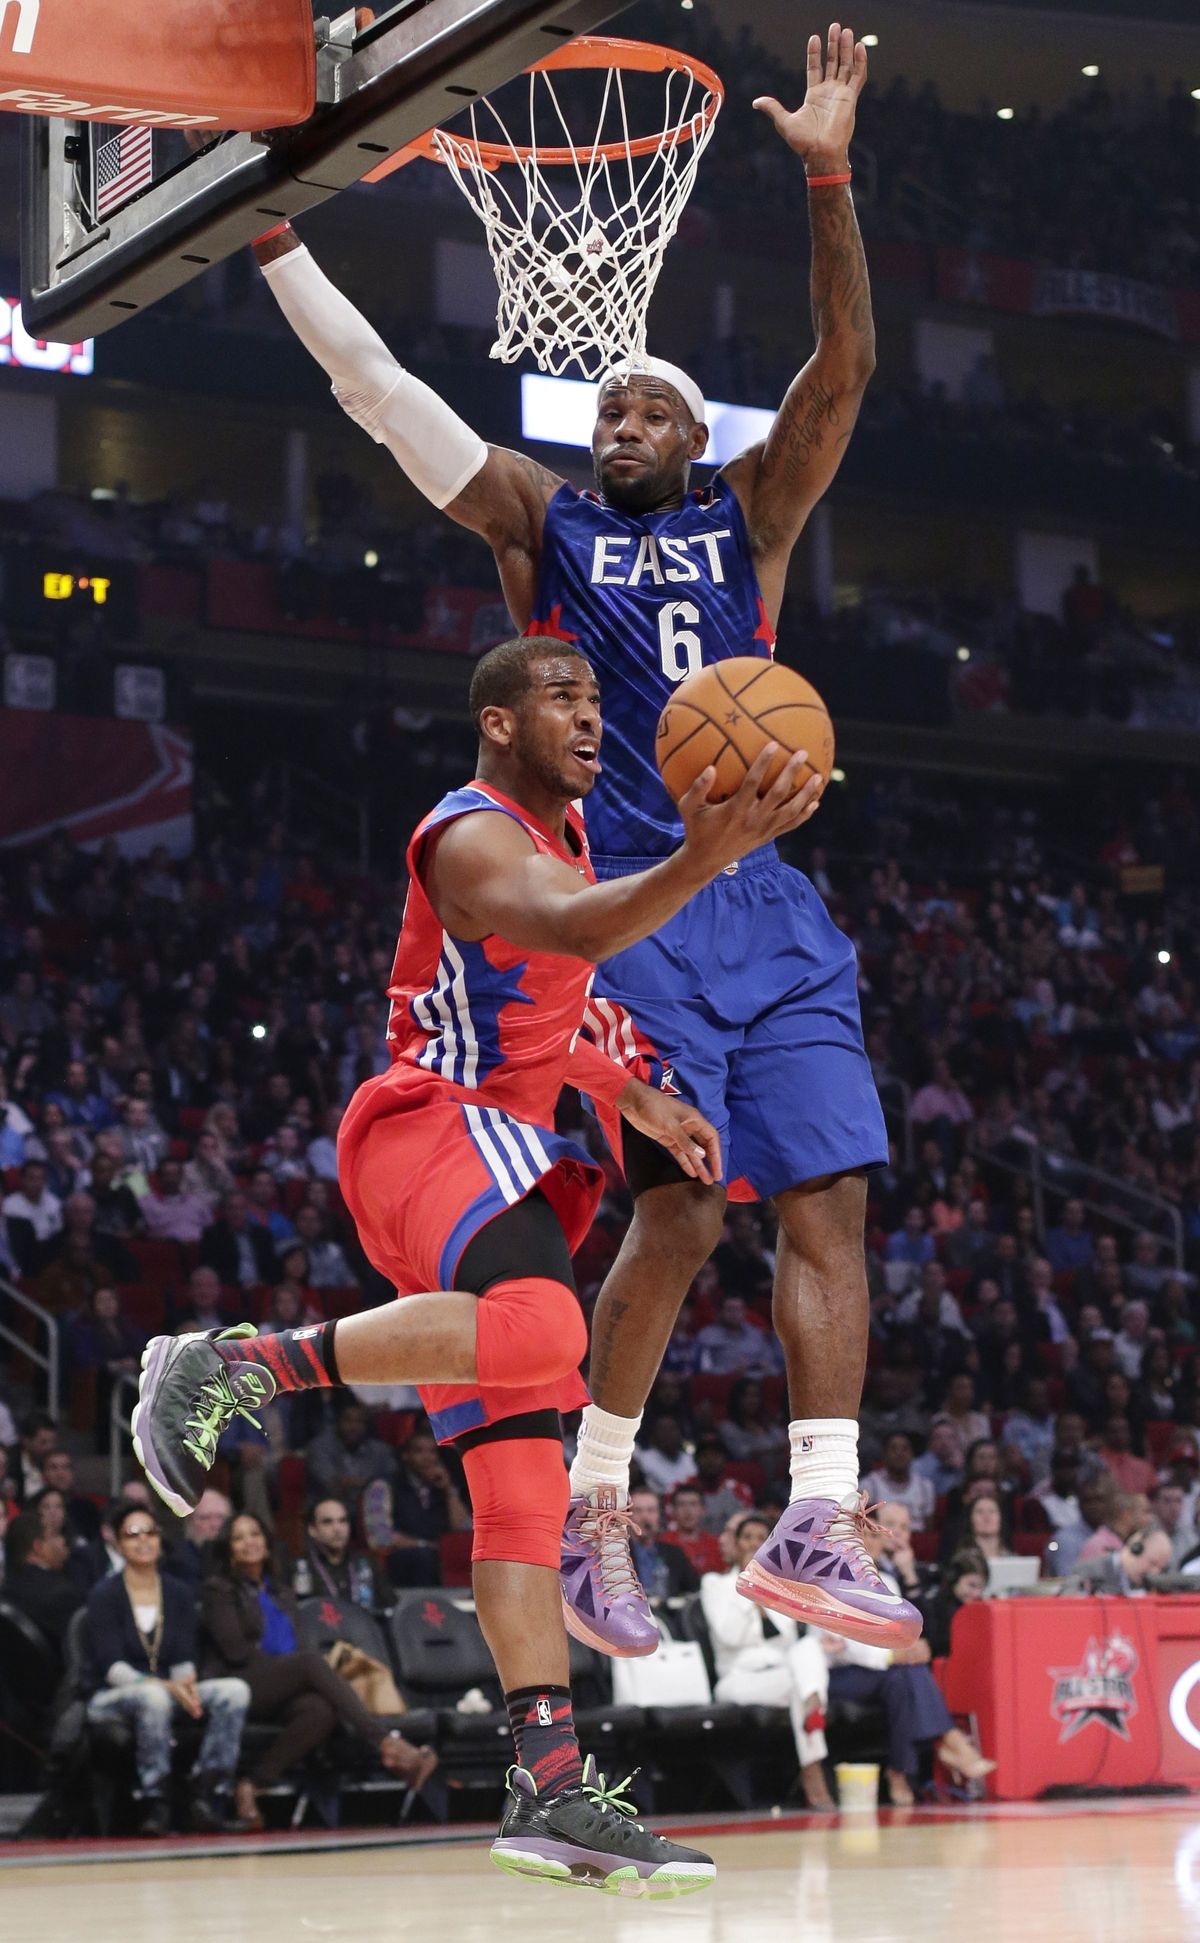 All-Star MVP Chris Paul of the West looks to score against the East’s LeBron James on Sunday. (Associated Press)